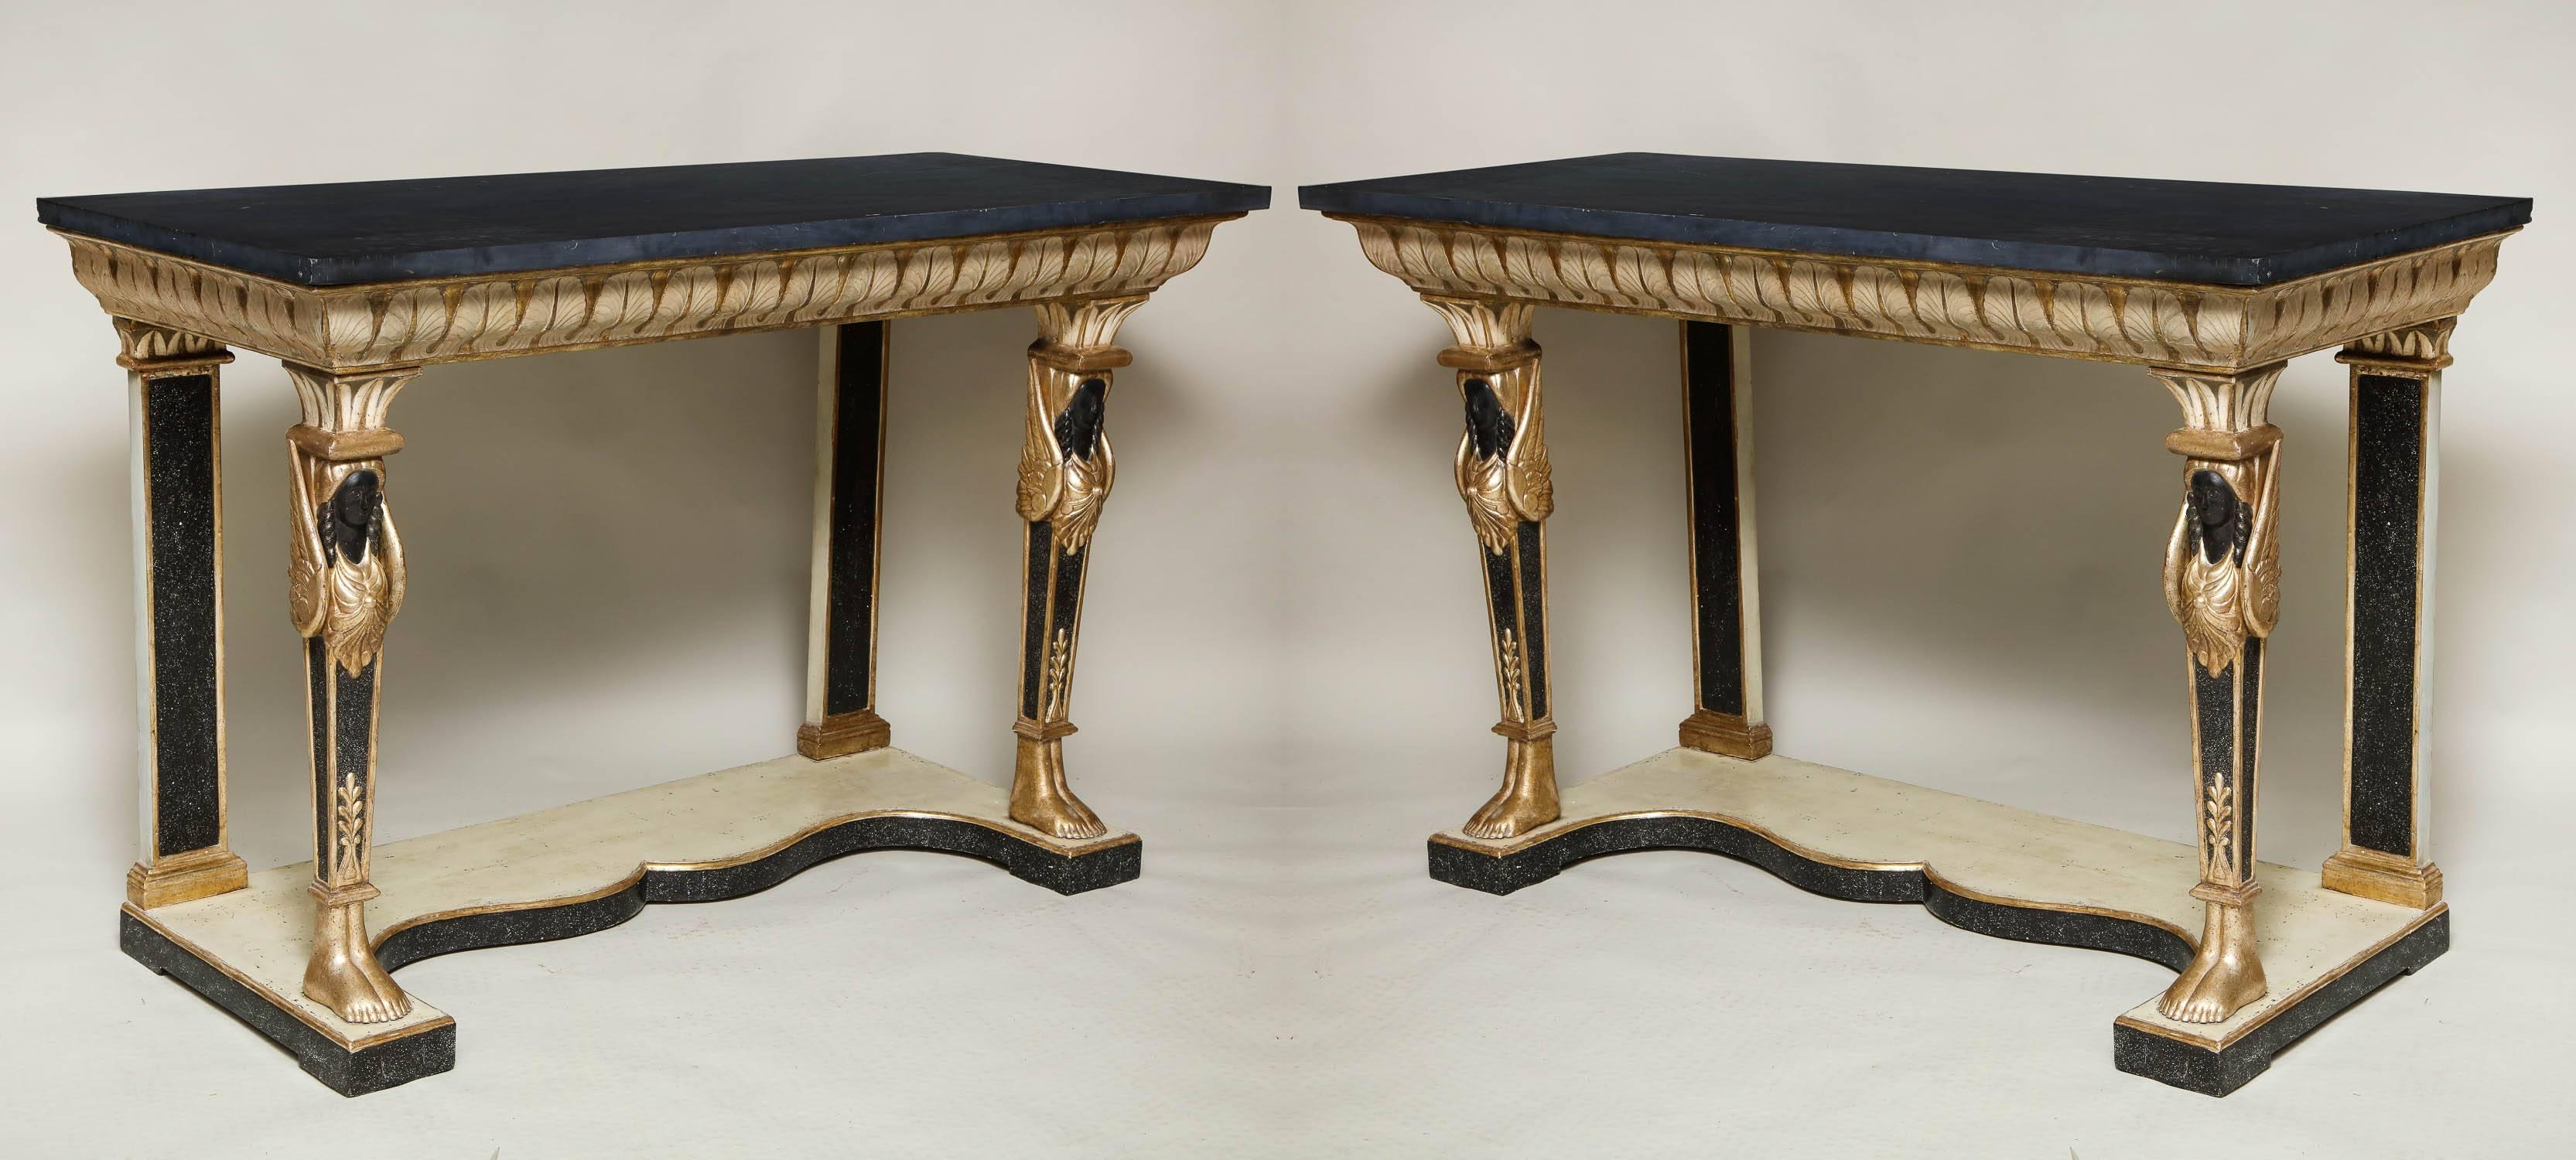 Stunning Deco Swedish-Egyptian Painted Consoles 2